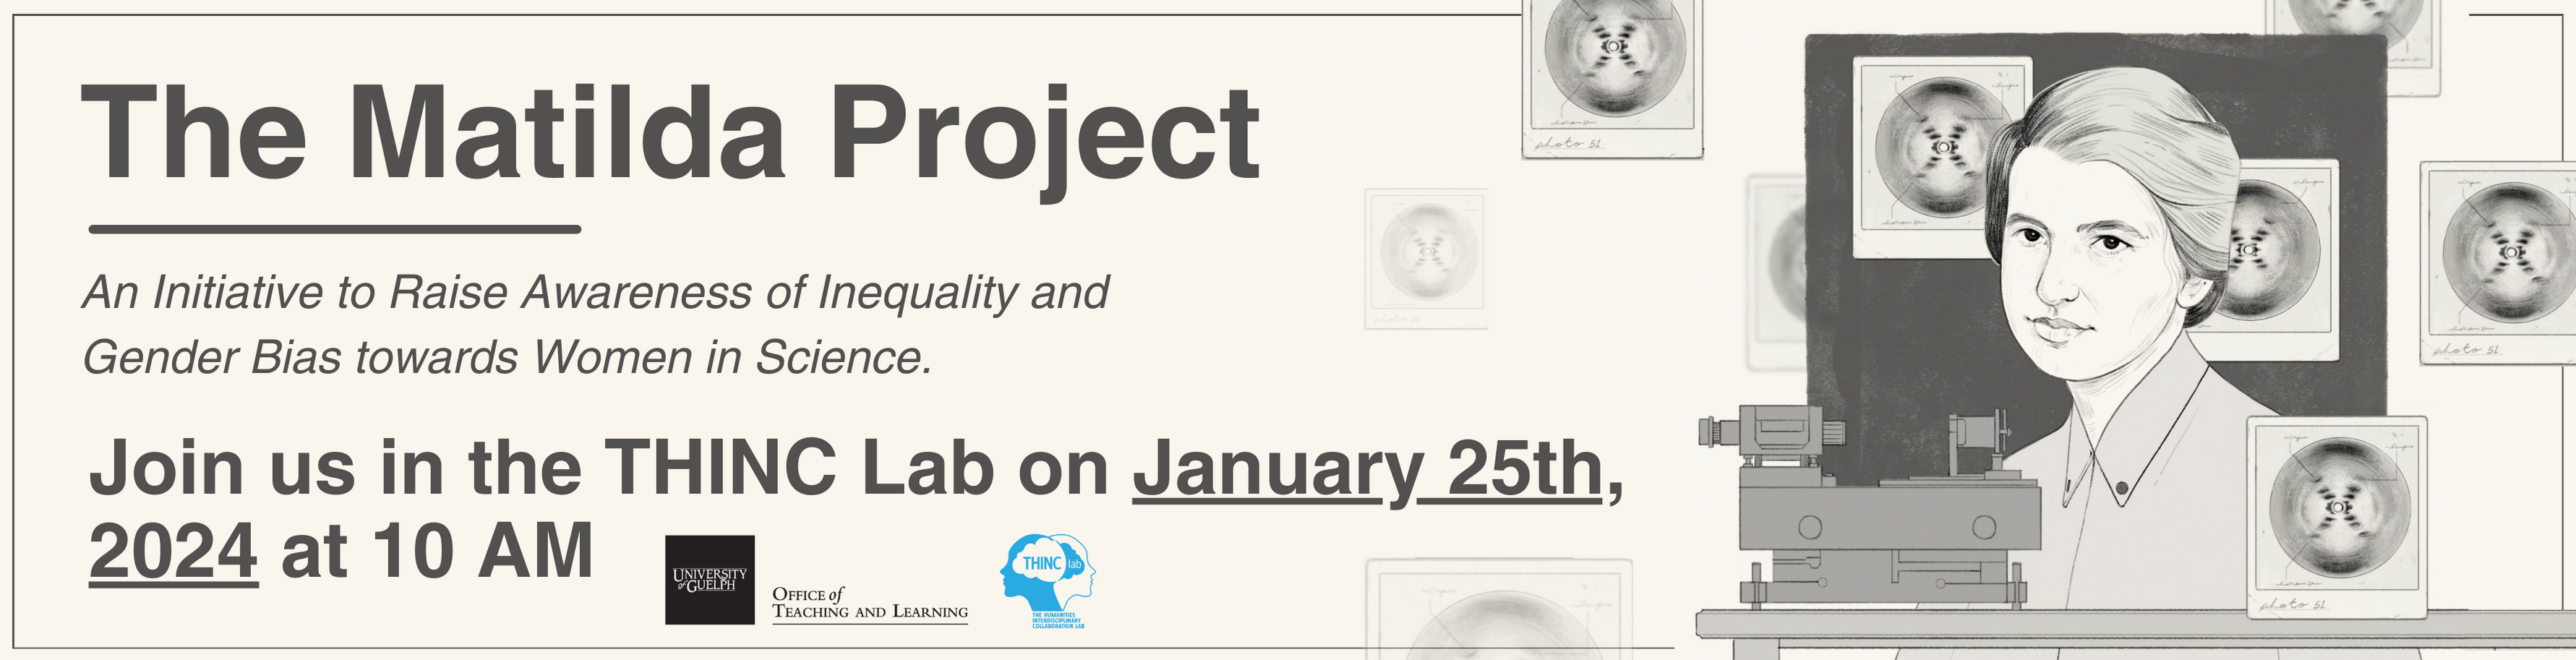 The Matilda Project - An Initiative to Raise Awareness of Inequality and Gender Bias towards Women in Science. Join us in the THINC Lab on January 25th, 2024 at 10 AM